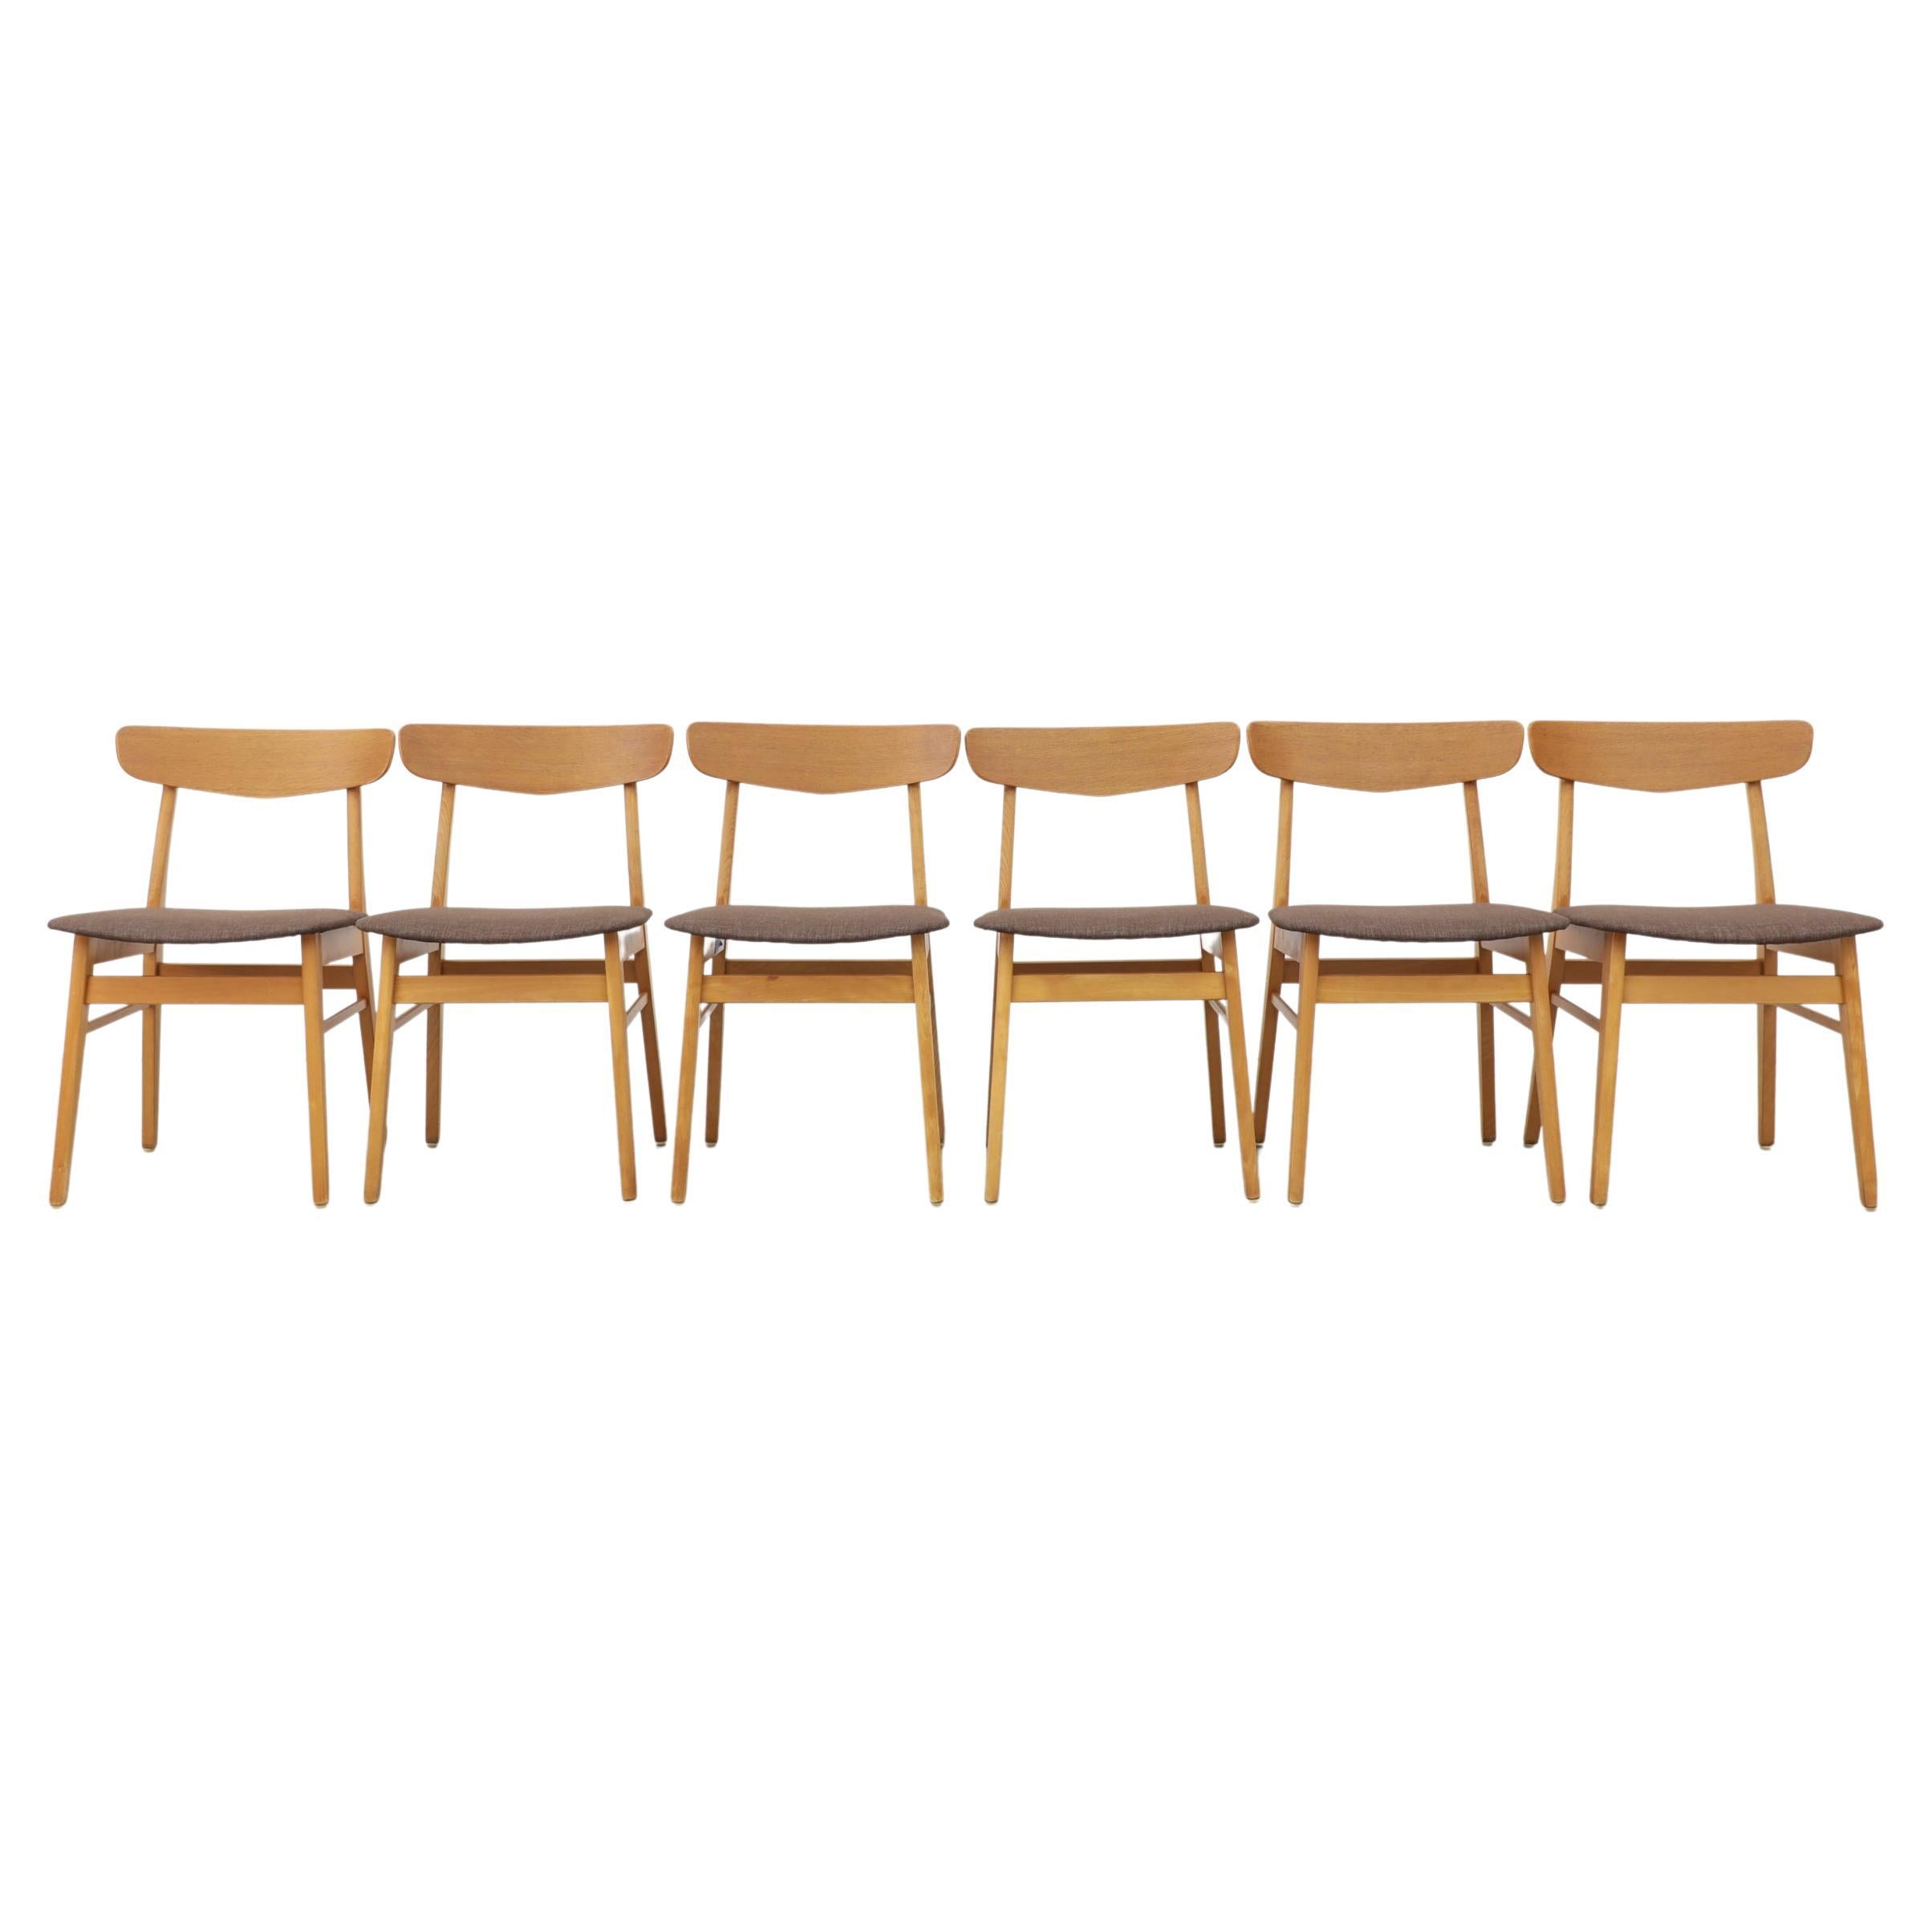 Set of 6 Borge Mogensen Style Dining Chairs by Farstrup